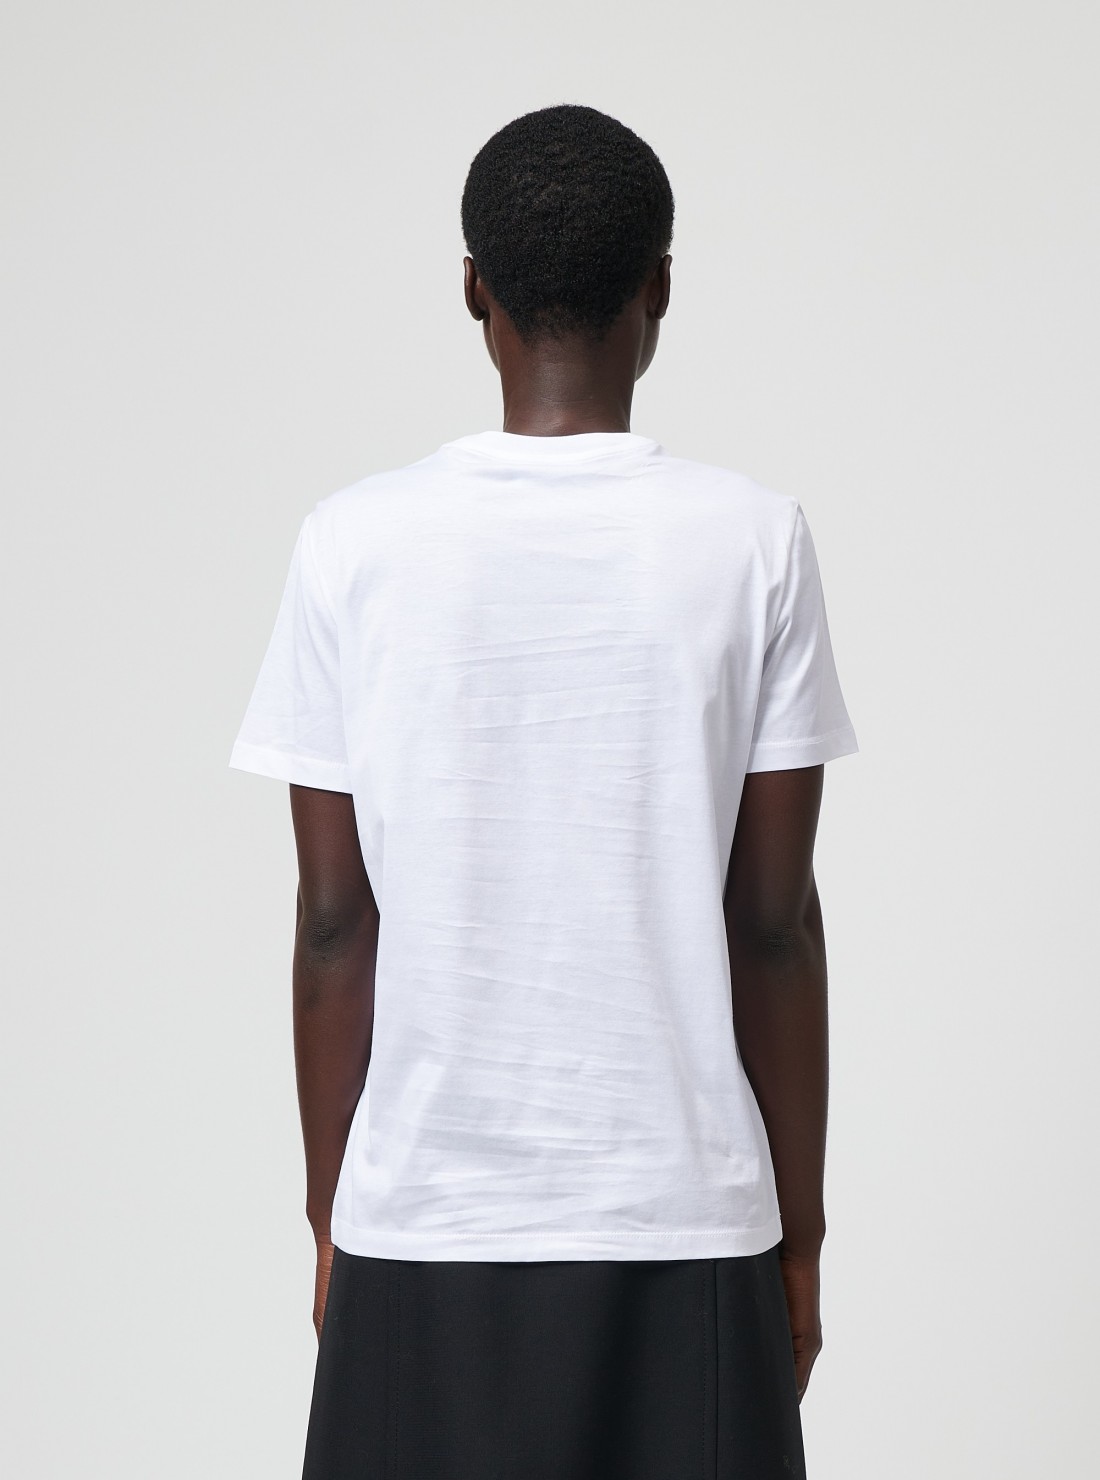 Ibiscus embroidered t-shirt